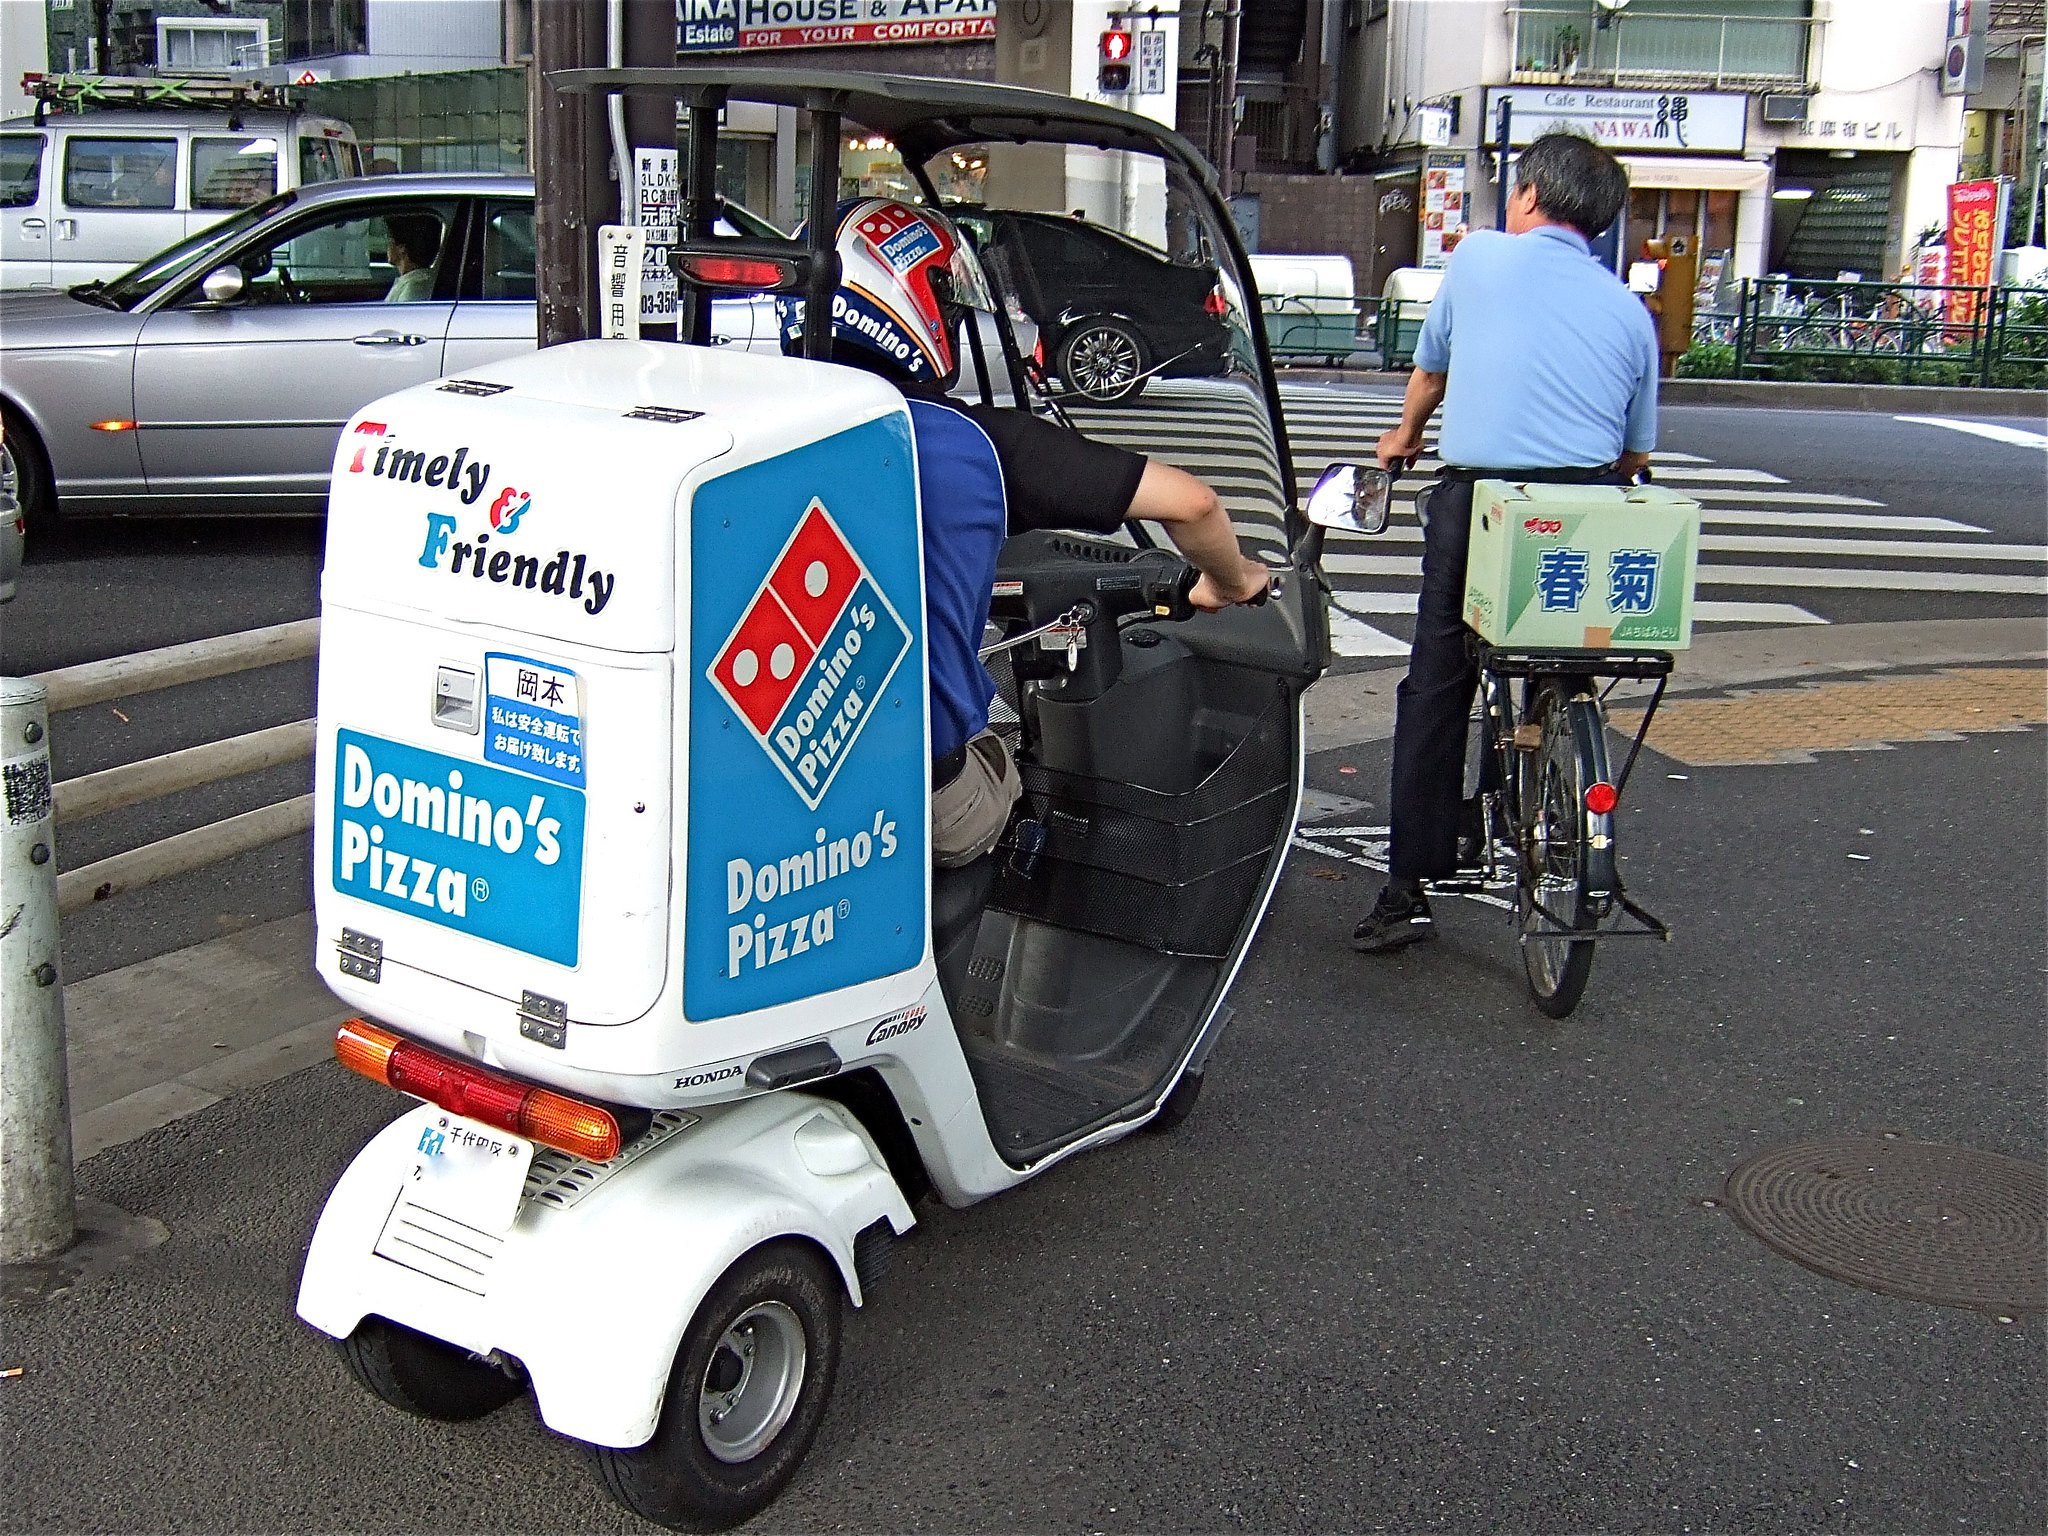 Domino’s, Pizza Hut introduce “Zero Contact” delivery service in Japan